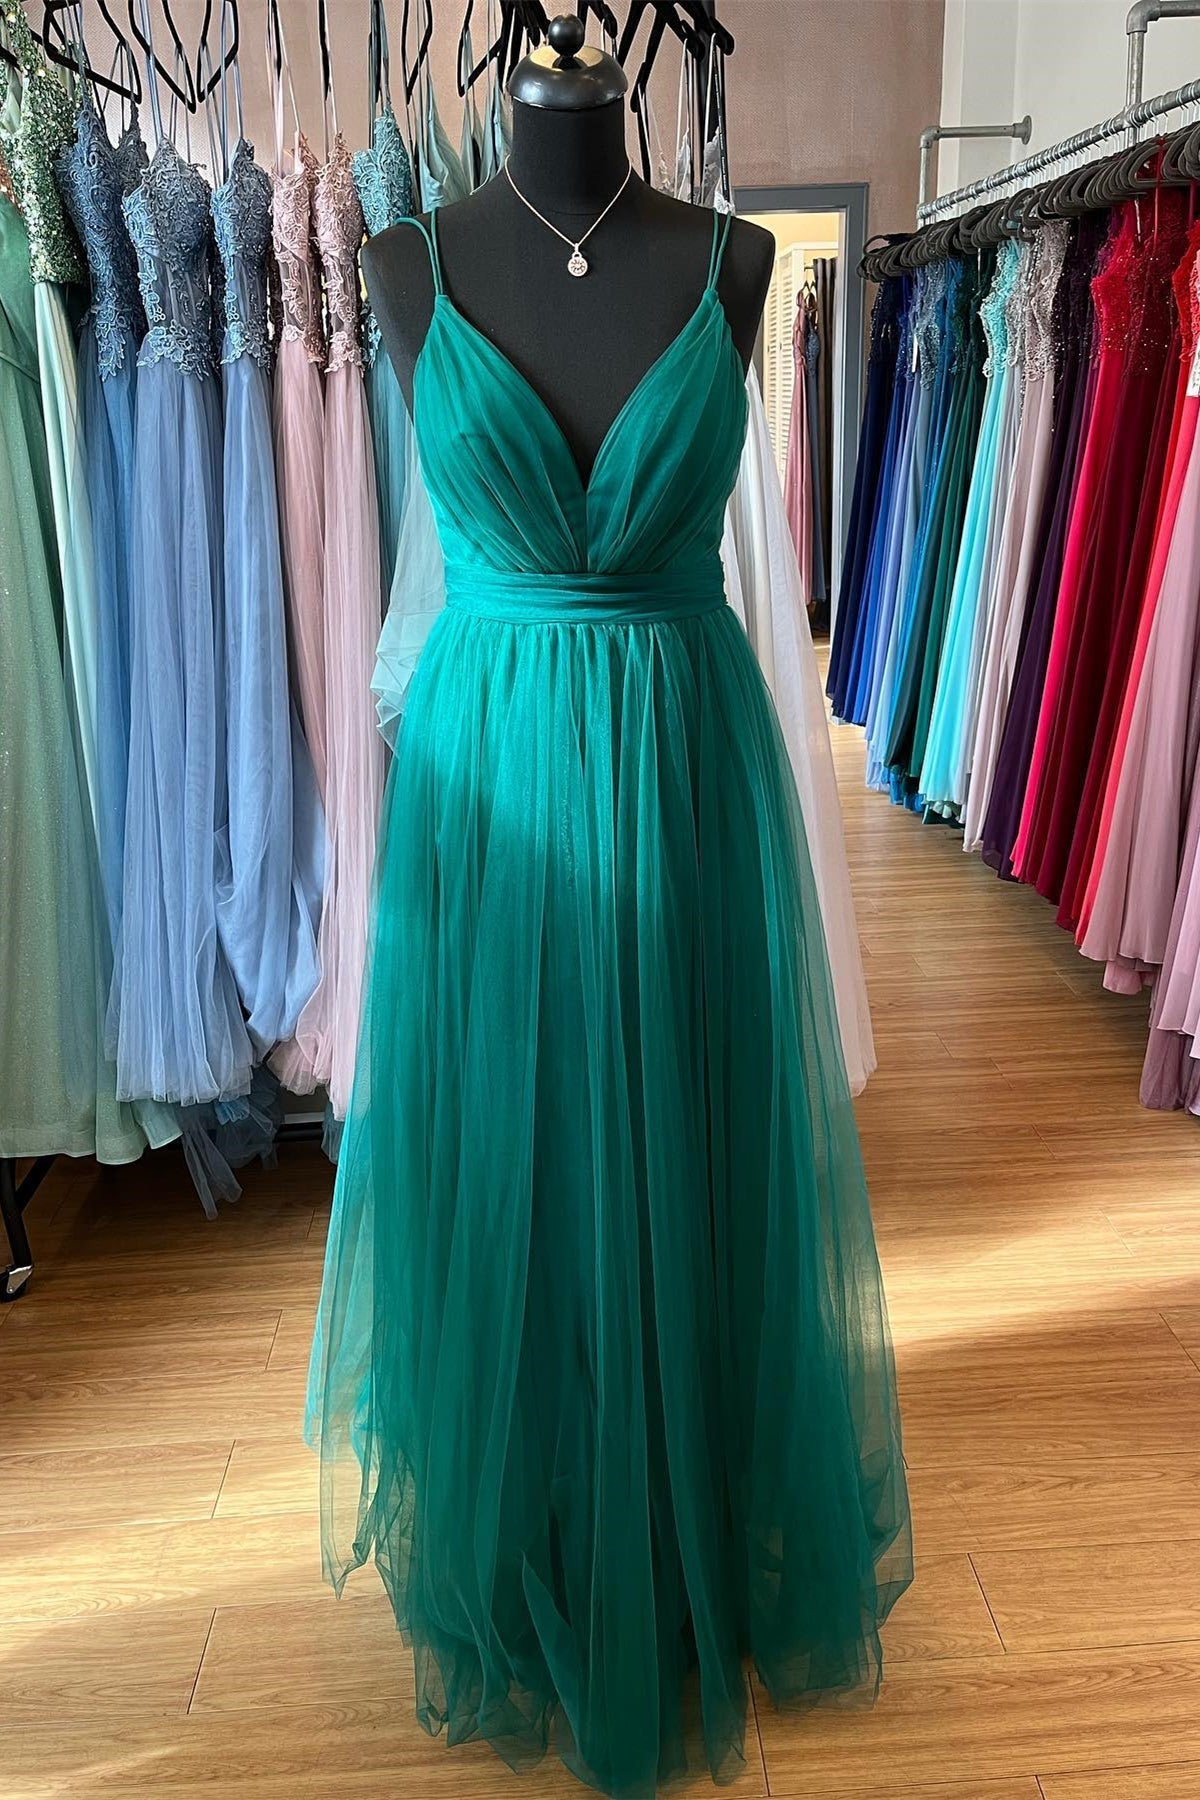 Ruffle Dress, Hunter Green A-line Plunging V Neck Double Straps Pleated Long Prom Dress